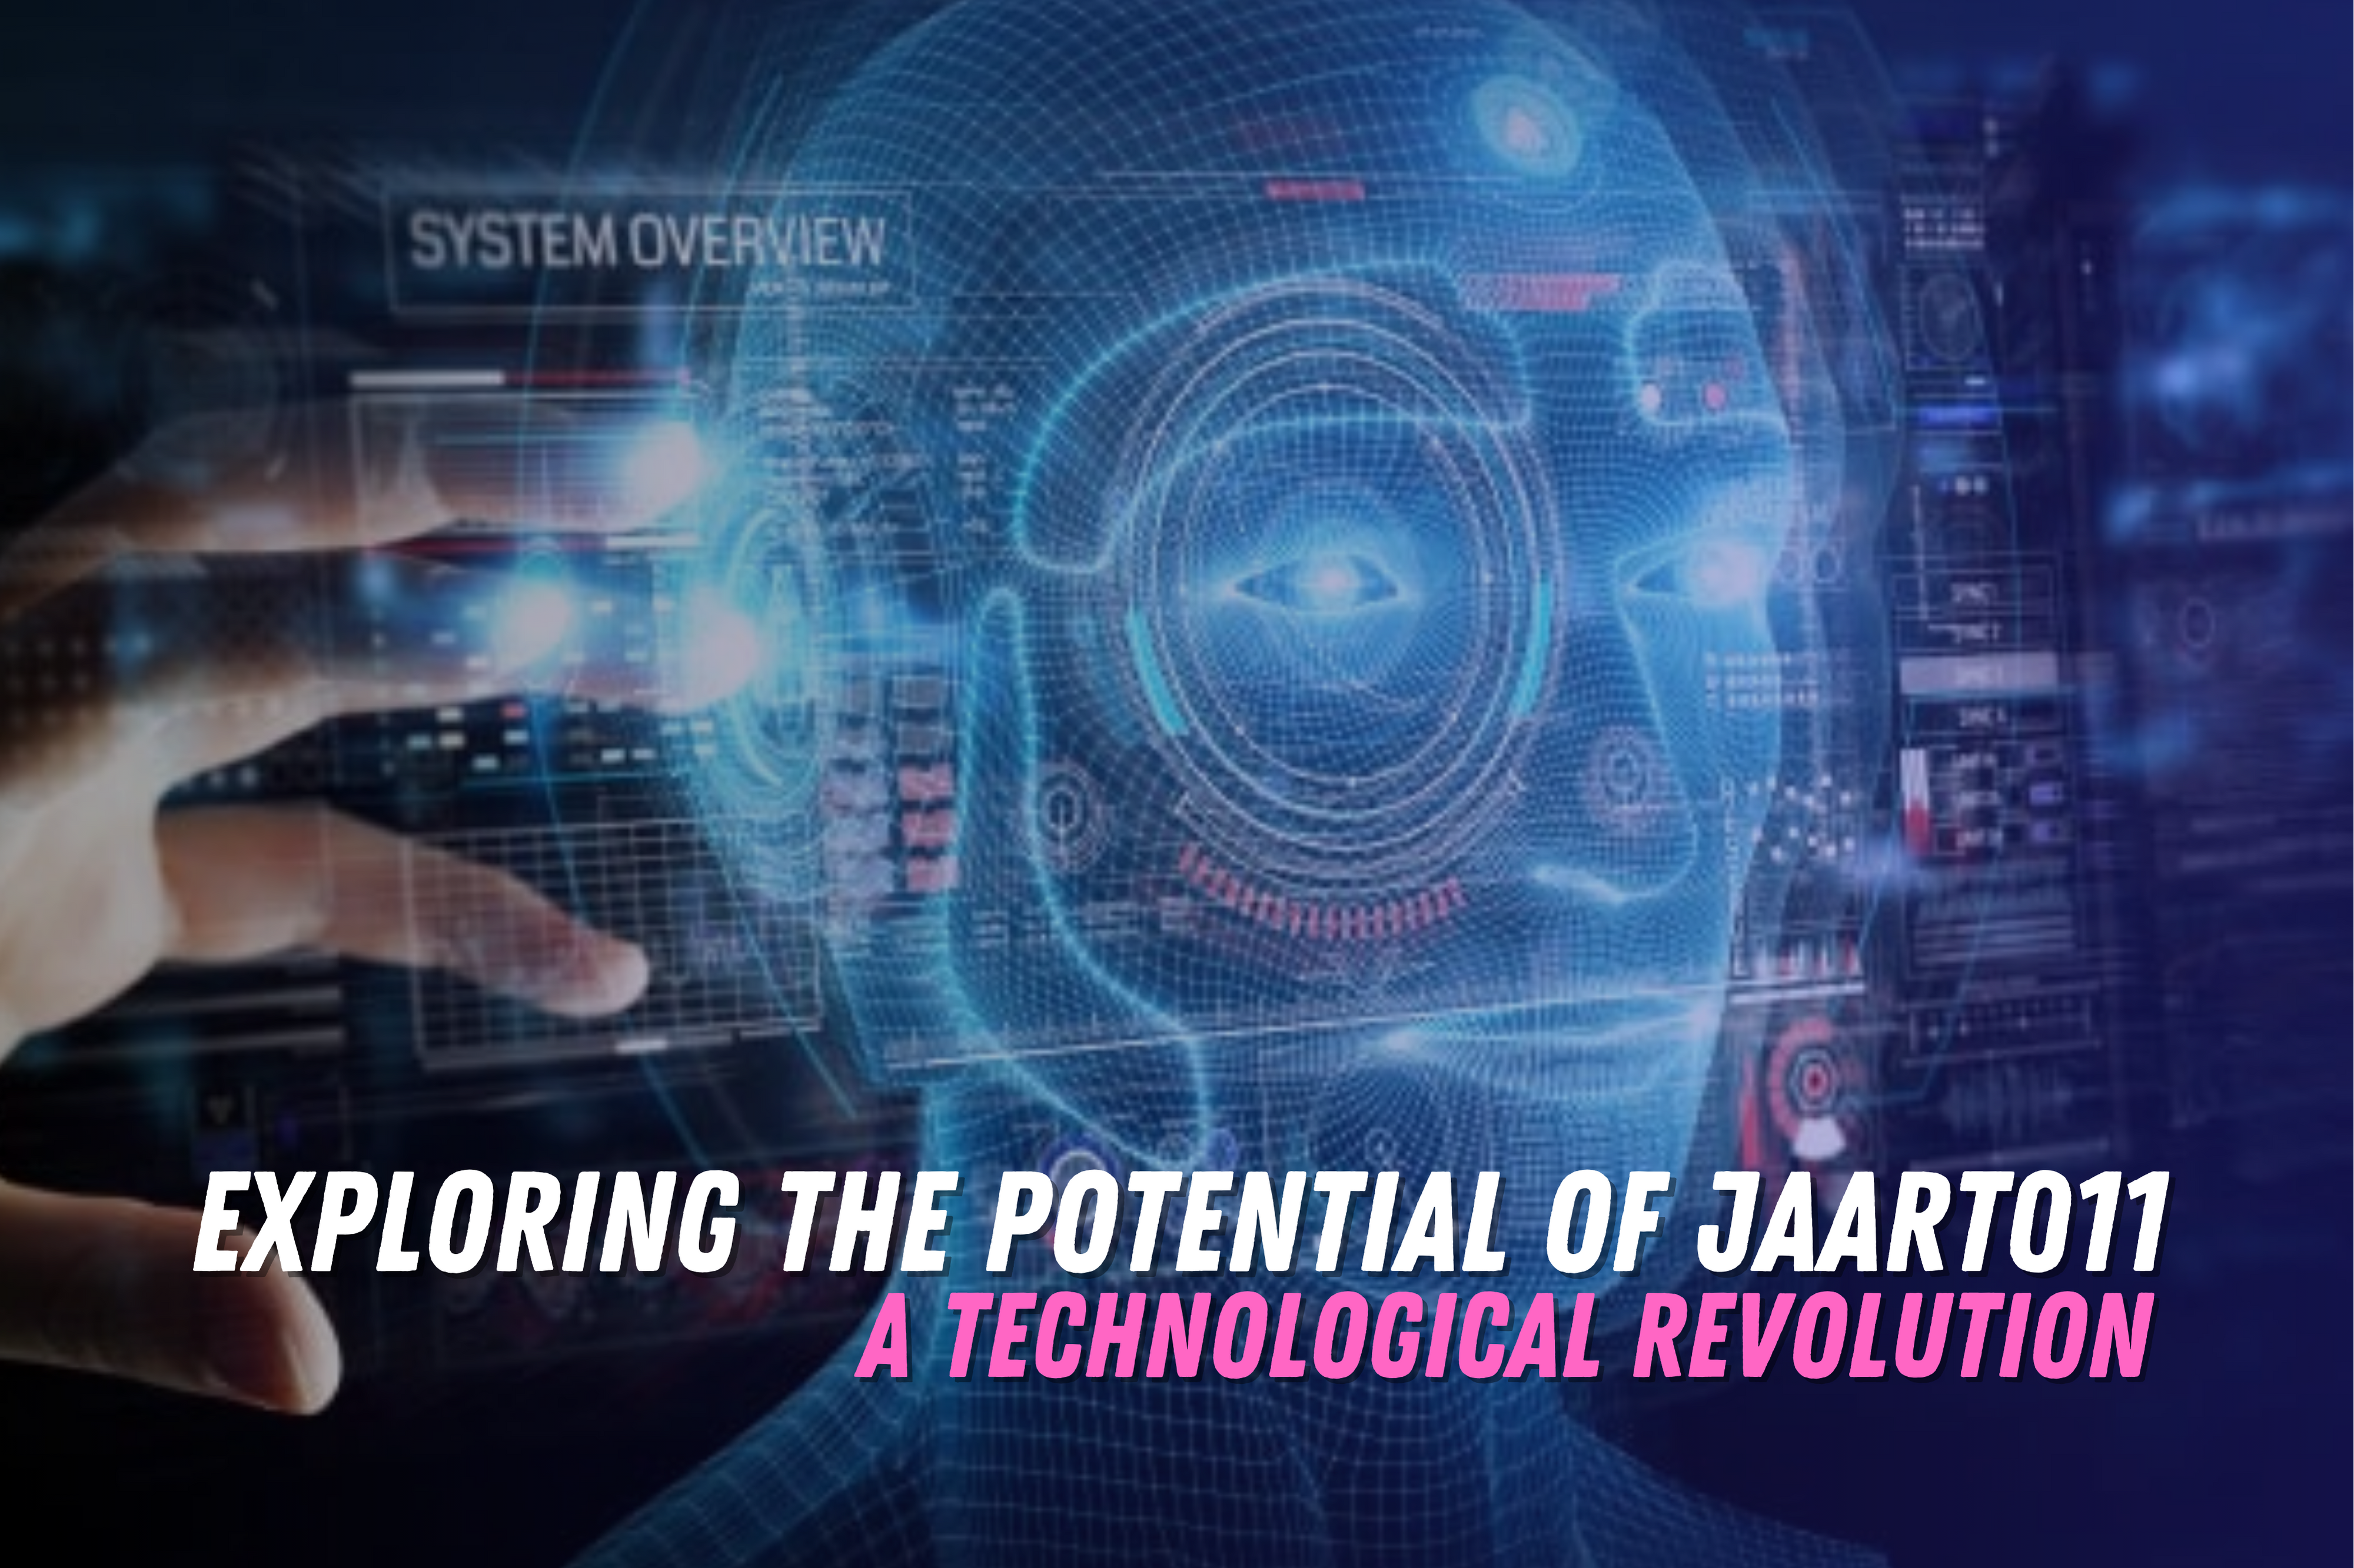 Exploring the potential of jaart011 in the tech world